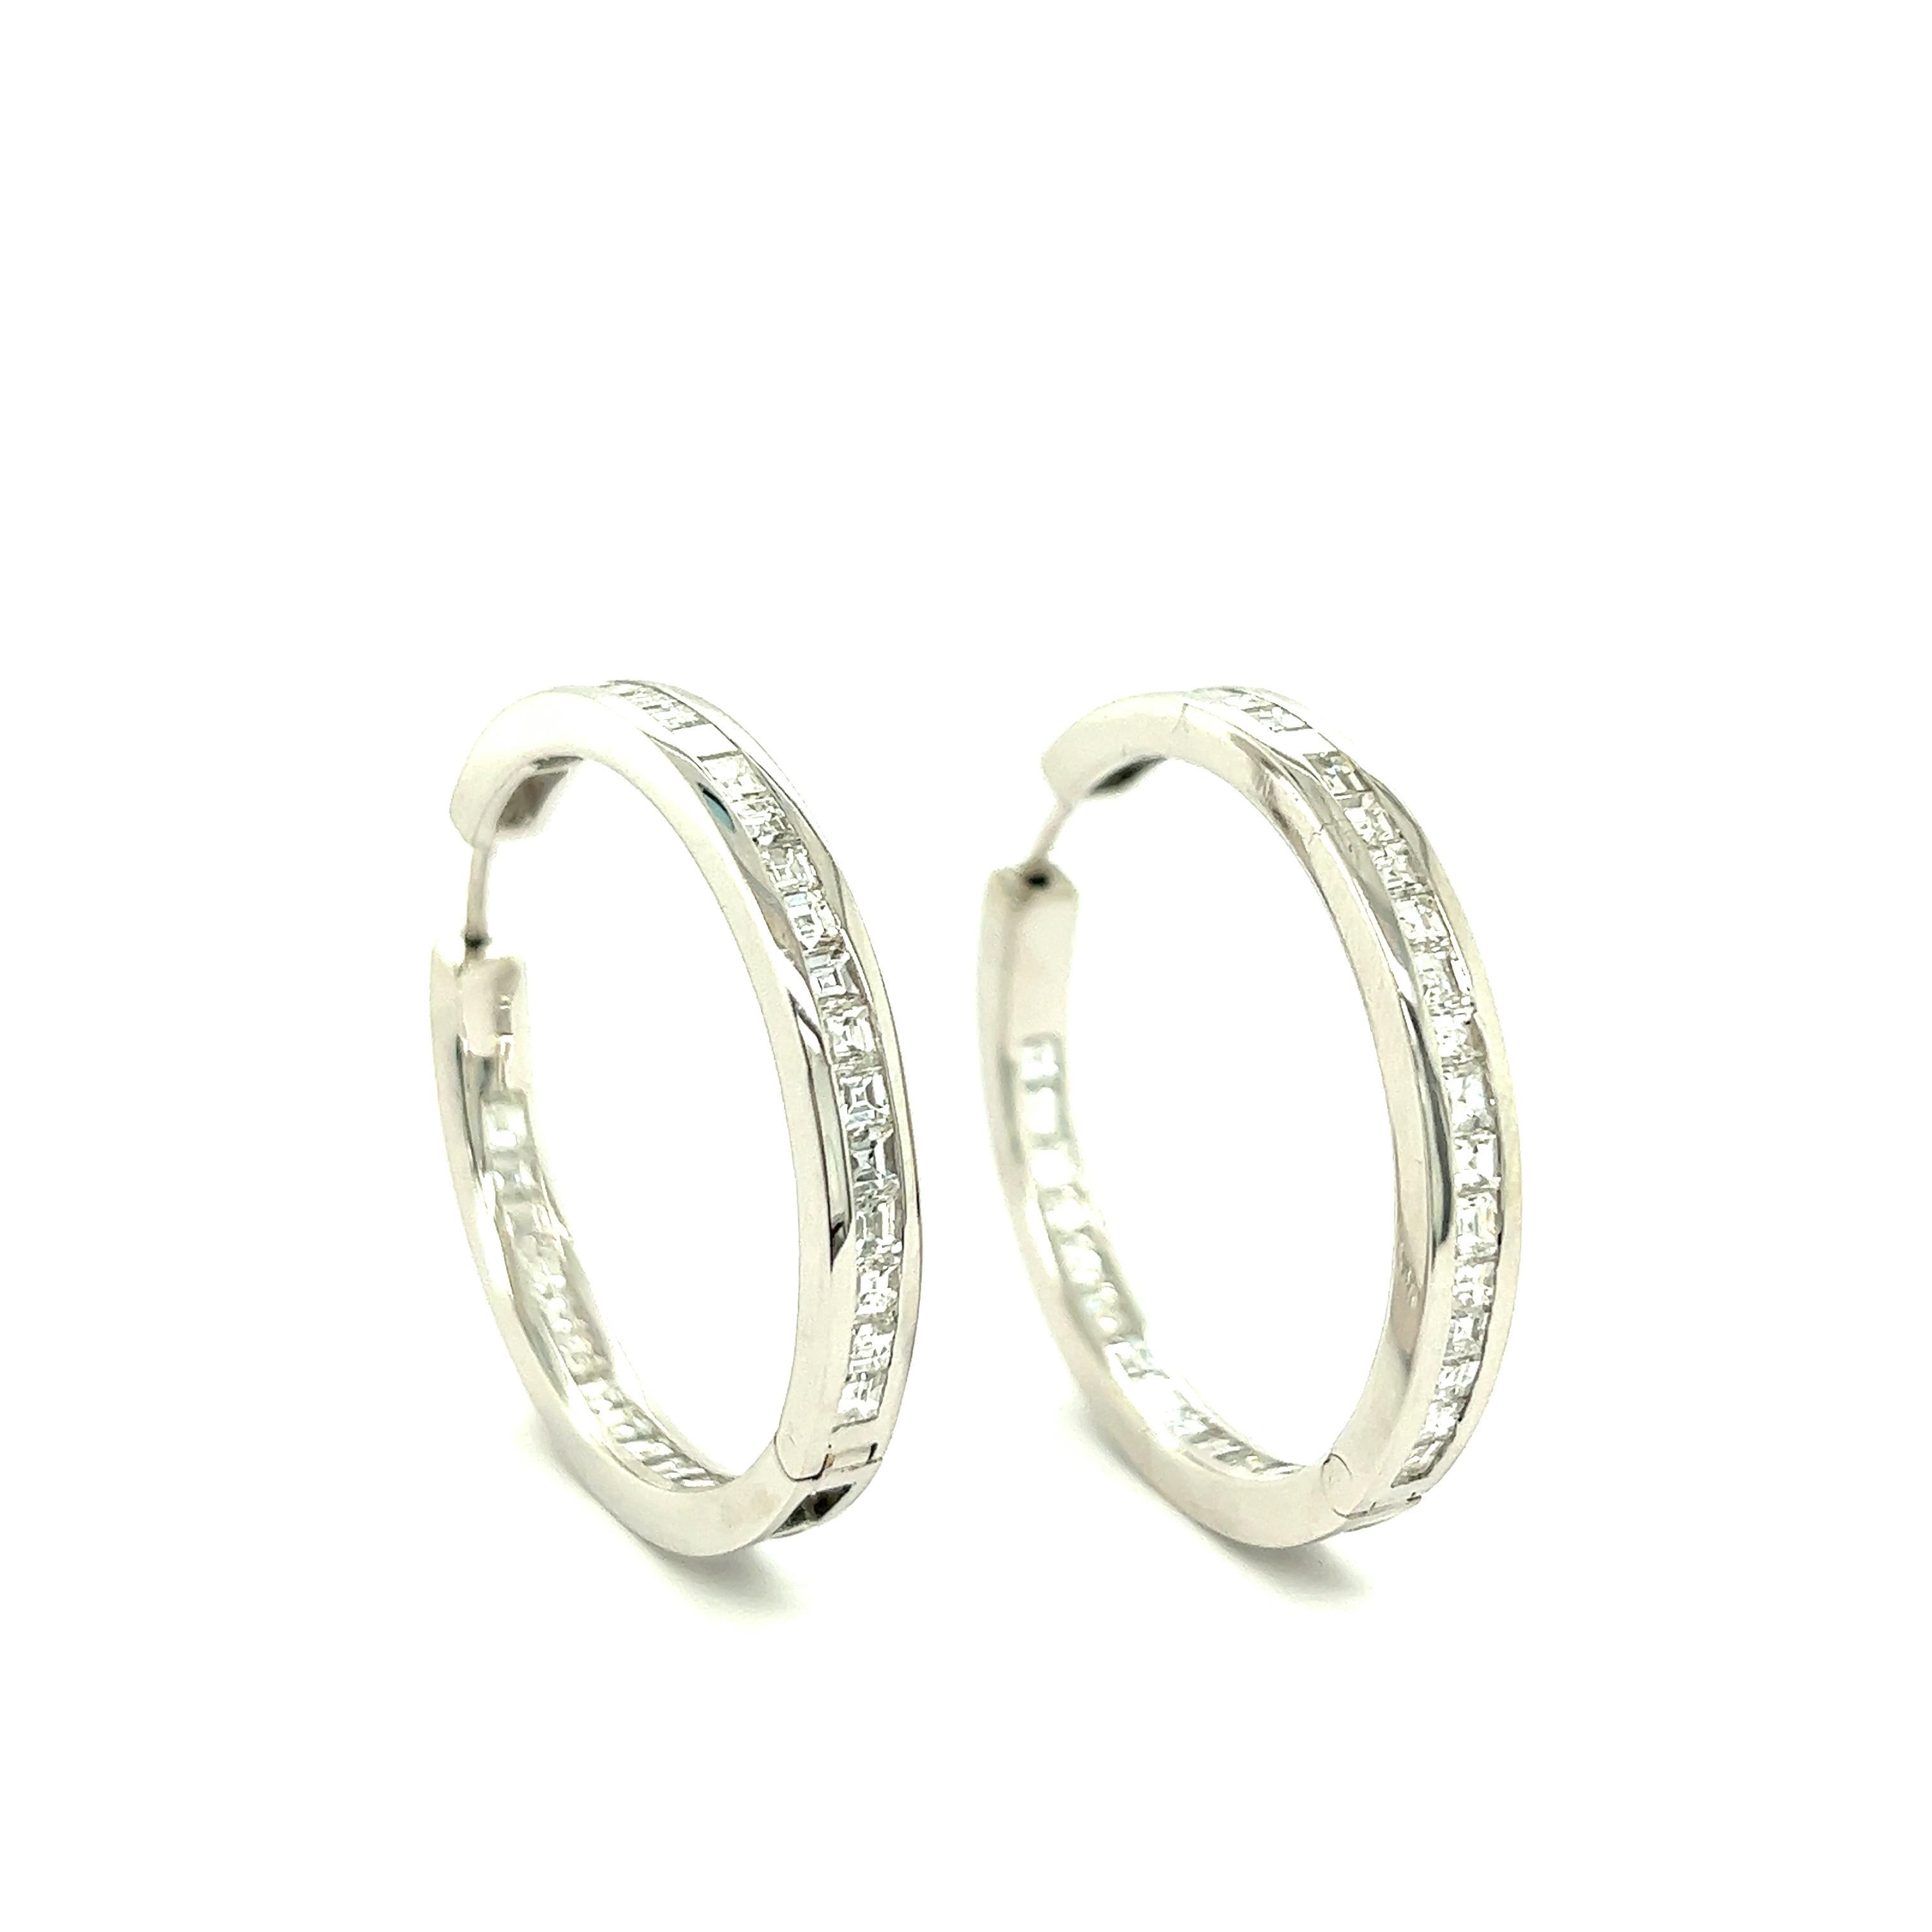 Curnis Diamond 18k White Gold Hoop Earrings In Excellent Condition For Sale In New York, NY